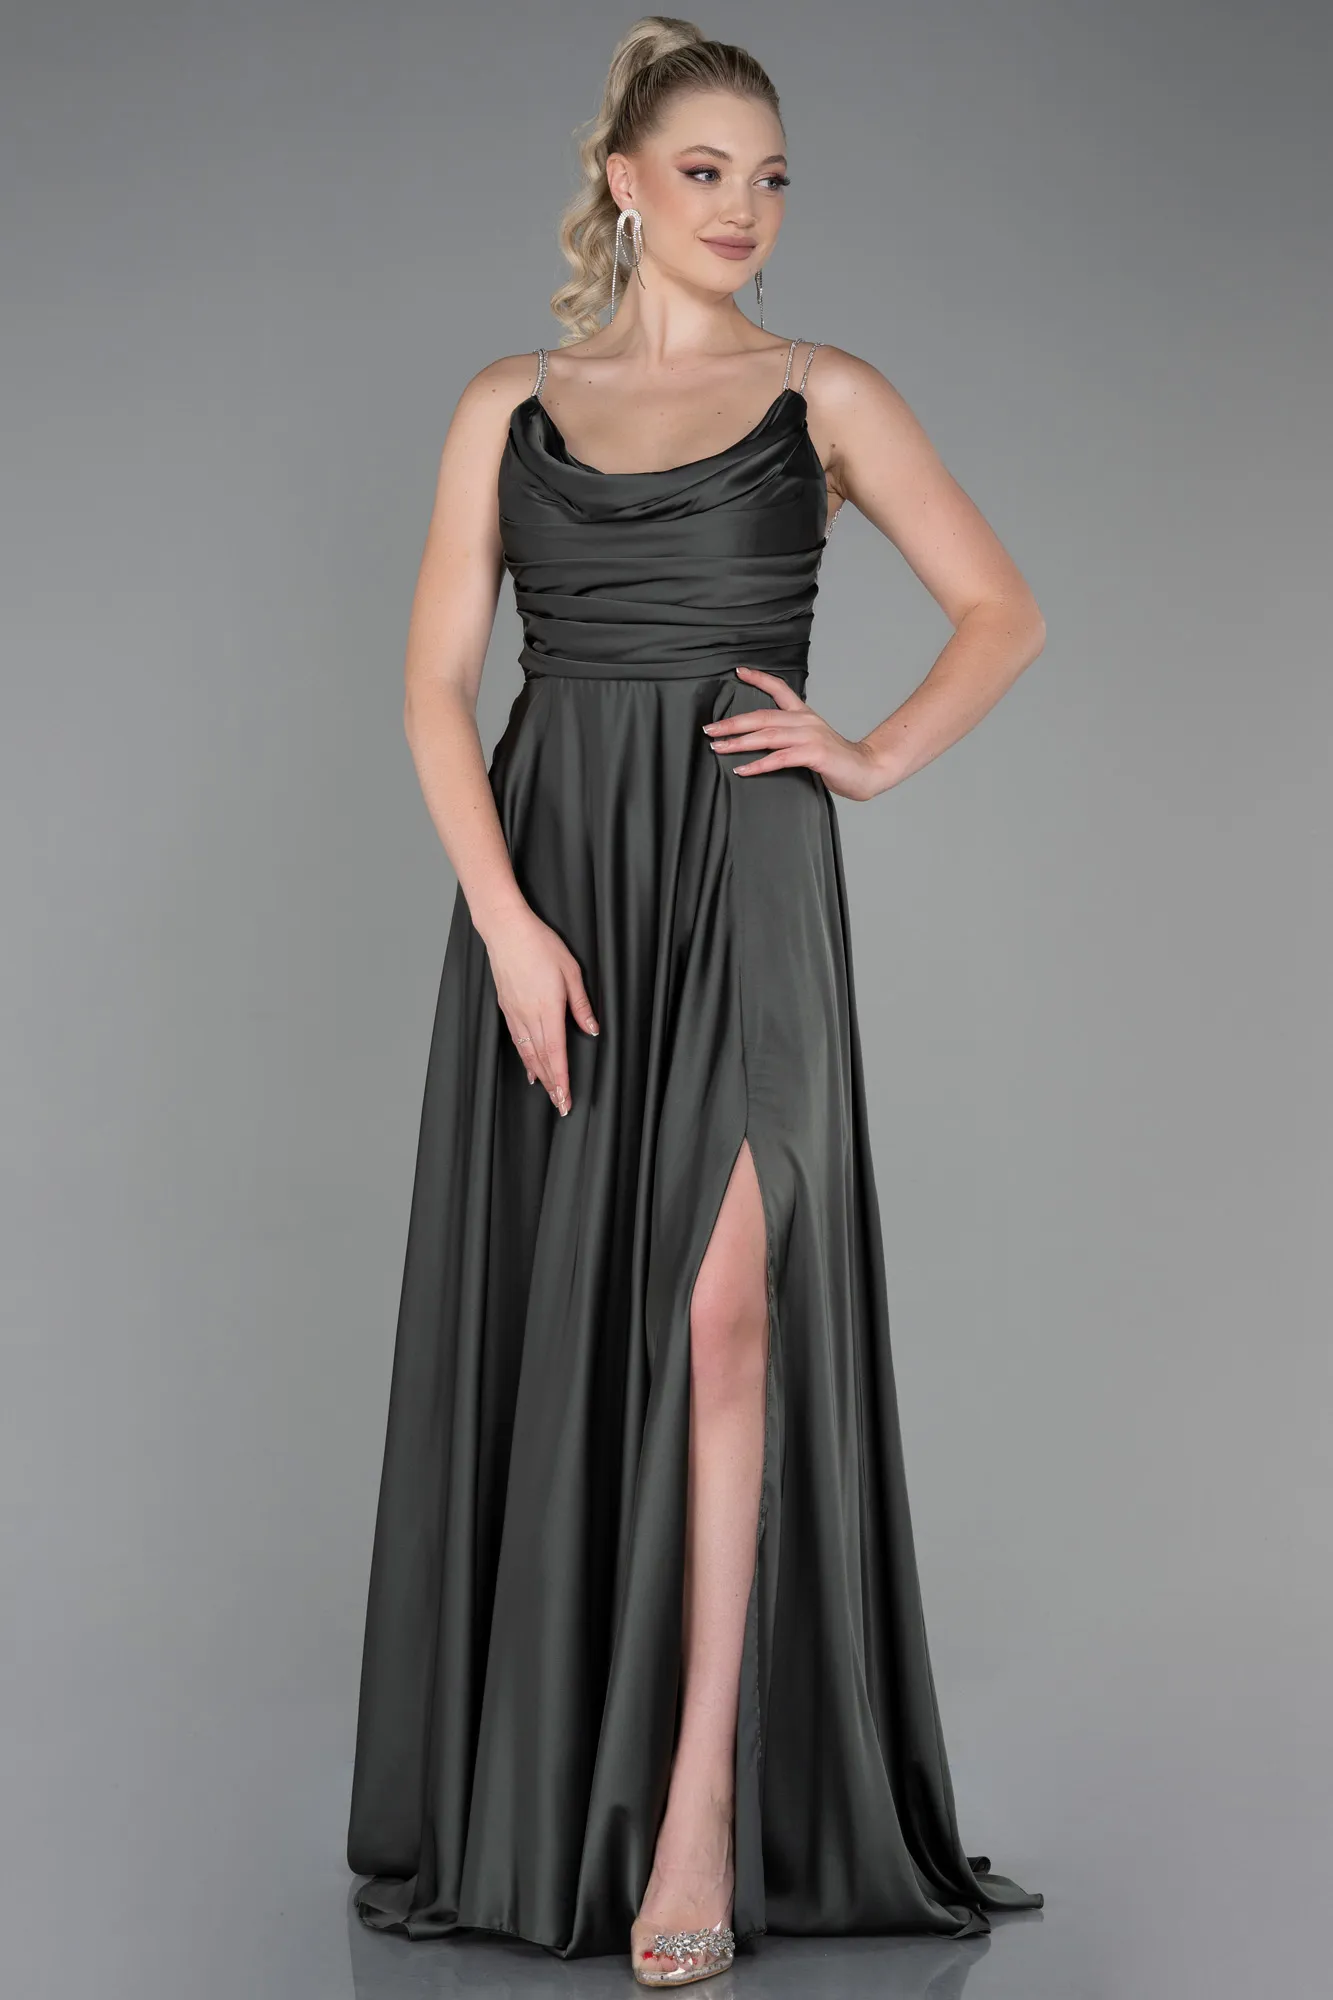 Olive Drab-Long Satin Prom Gown ABU3275